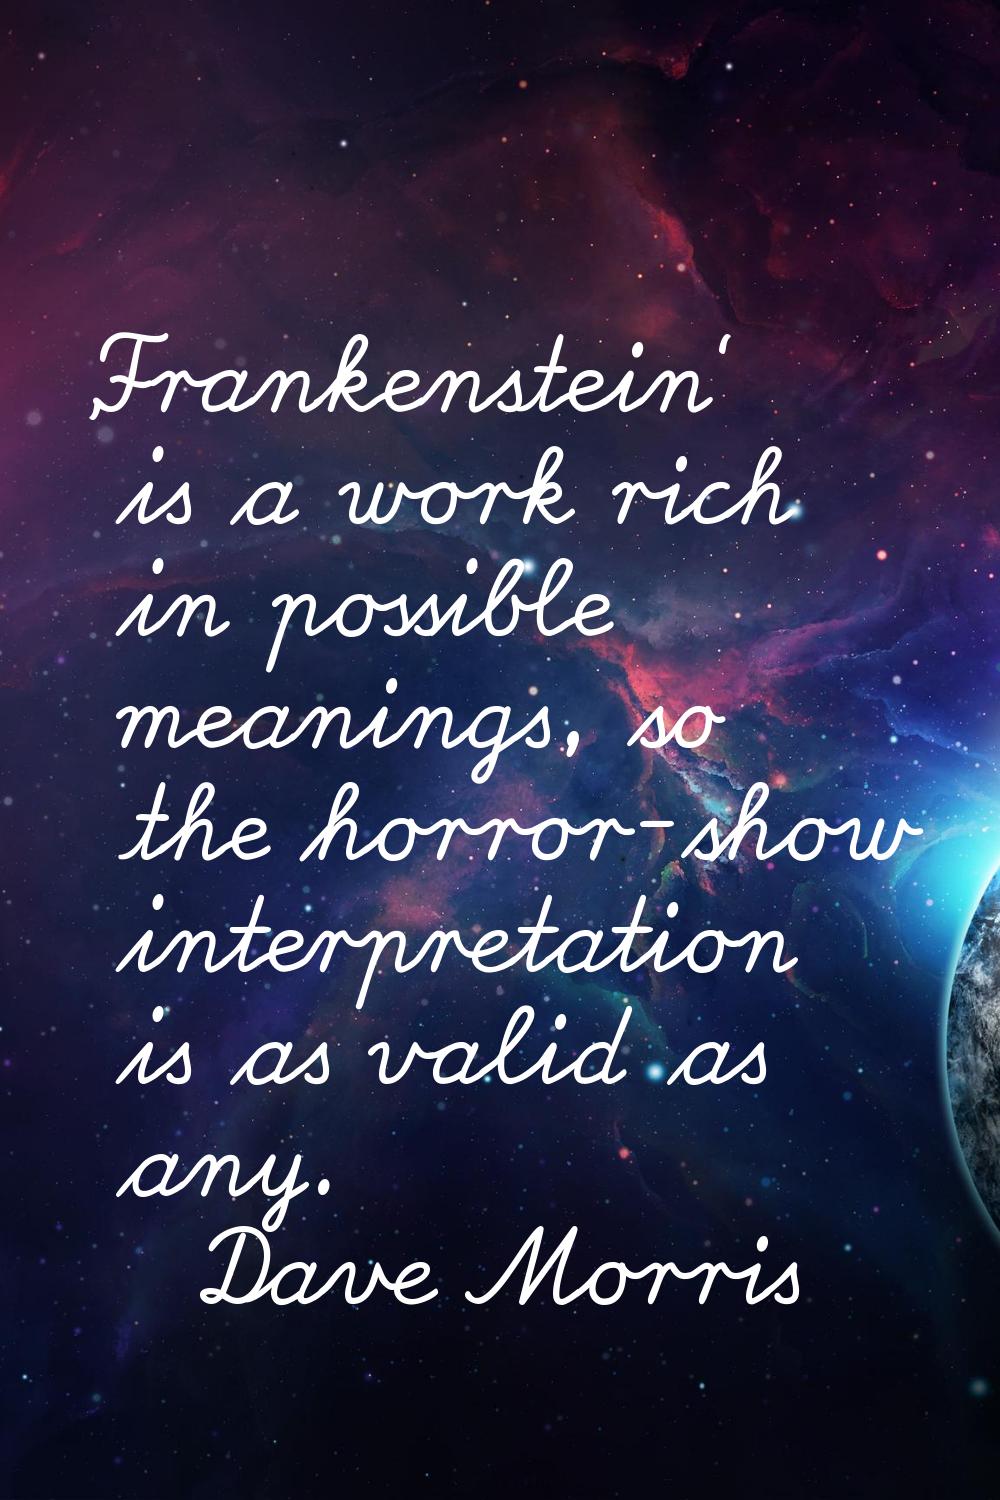 'Frankenstein' is a work rich in possible meanings, so the horror-show interpretation is as valid a